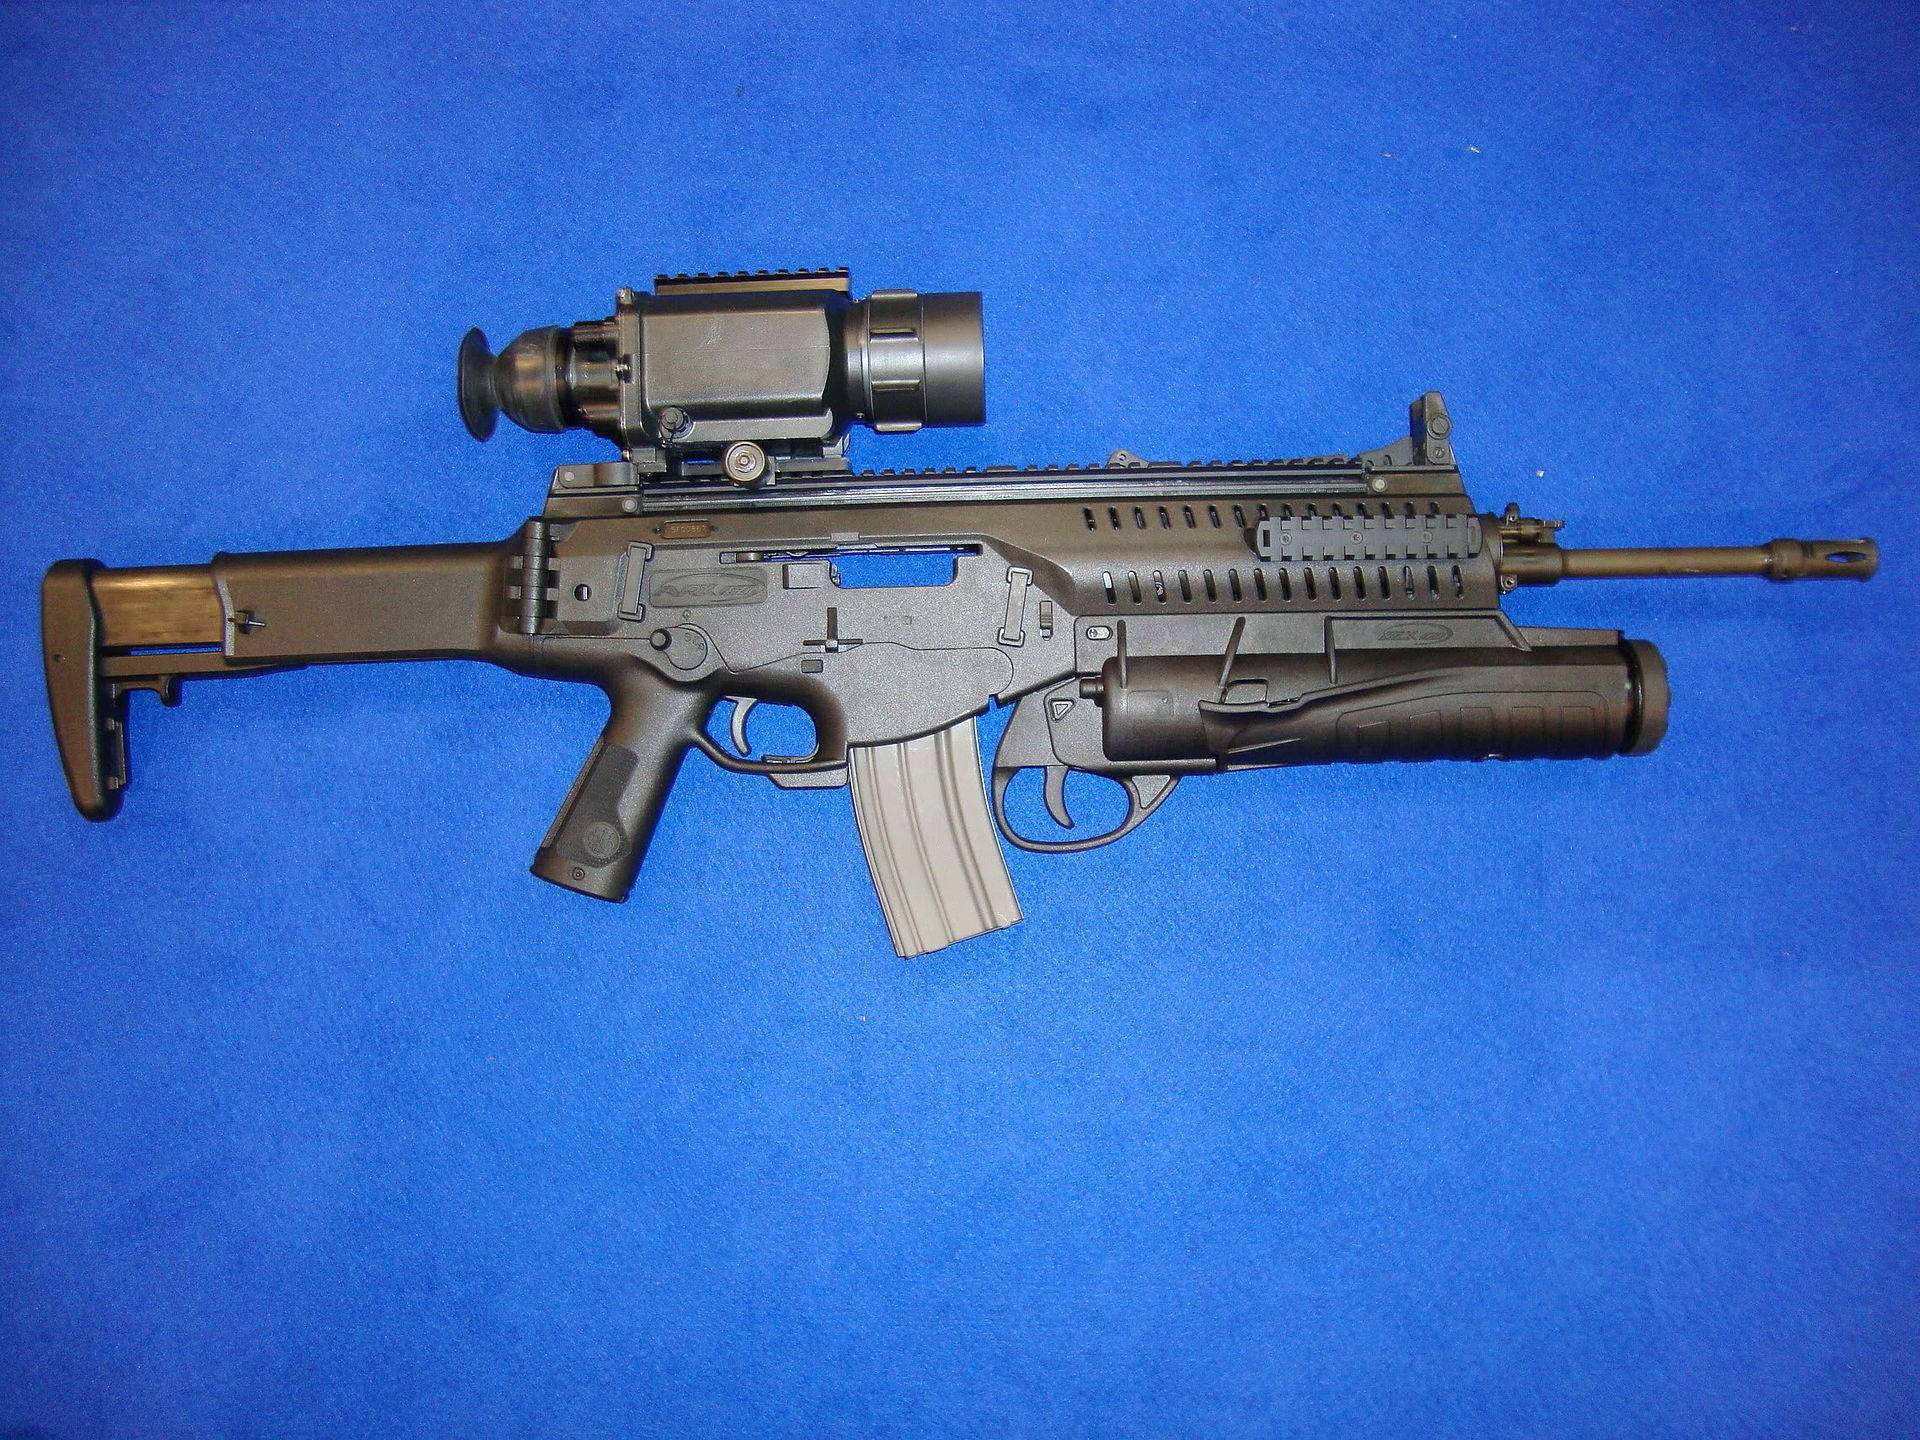 Beretta arx-160 - internet movie firearms database - guns in movies, tv and video games